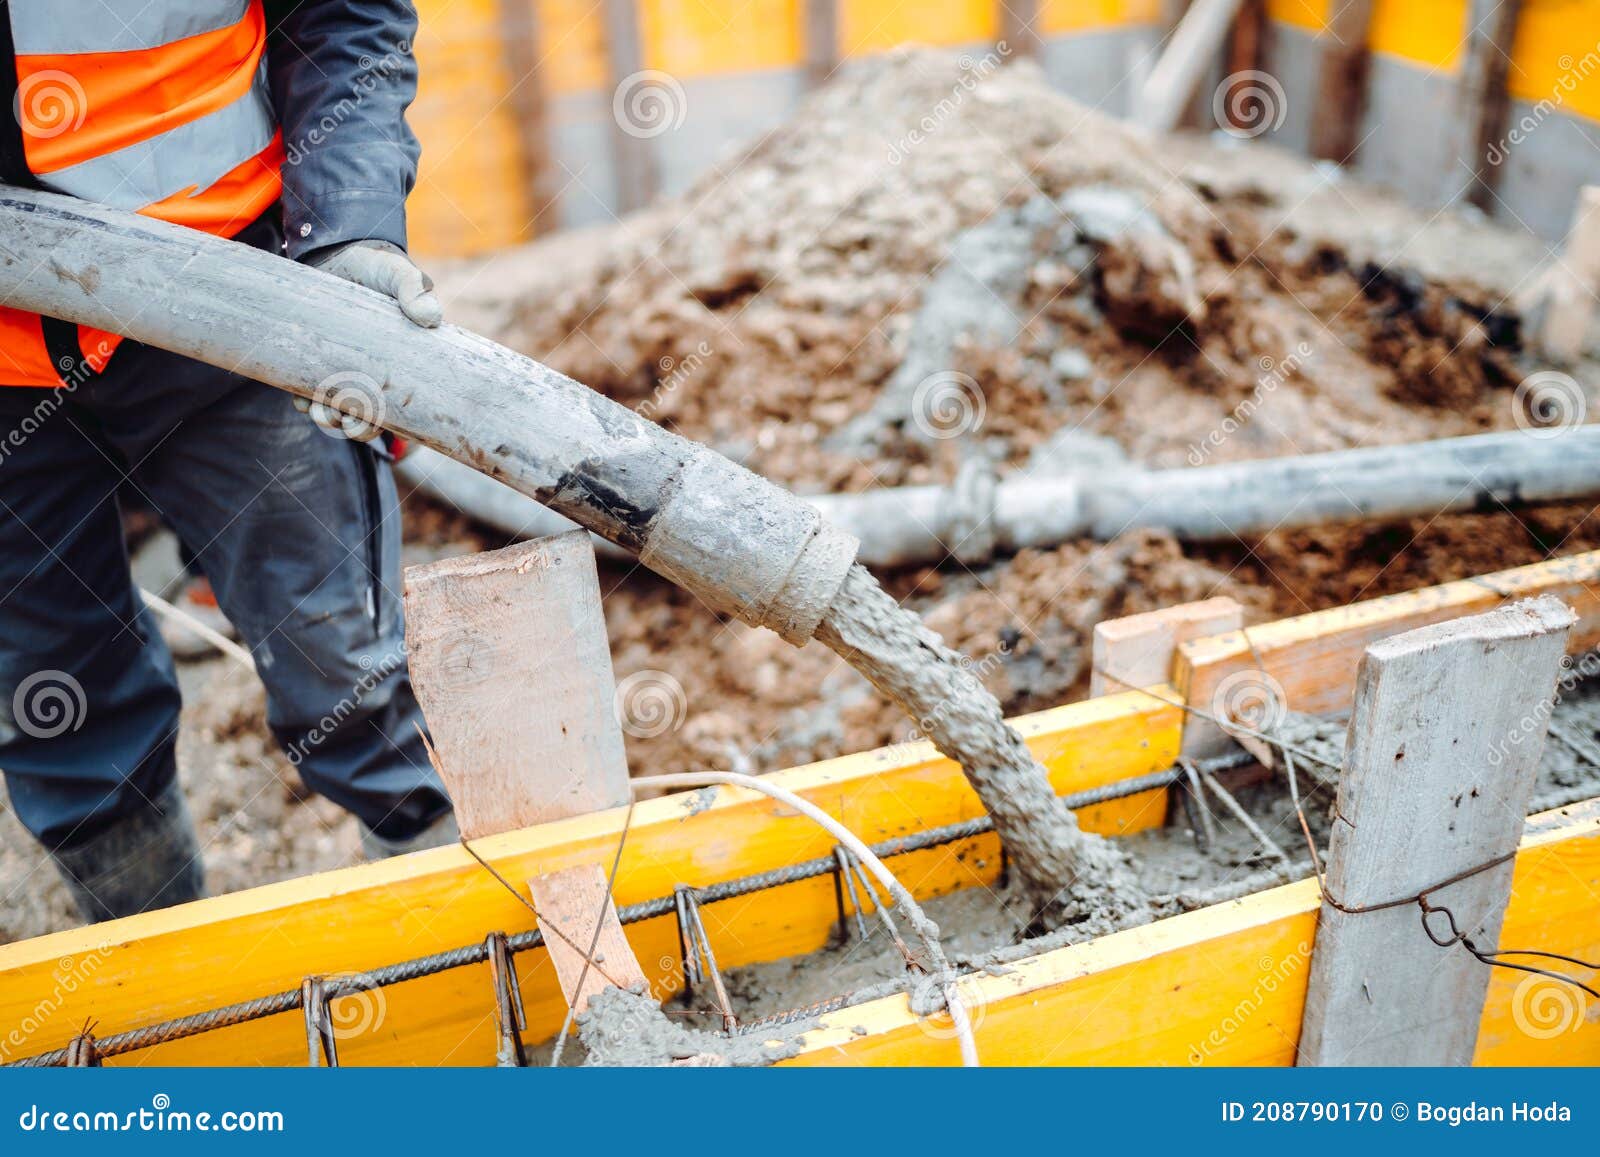 male workers pouring concrete with concrete hose. details of construction site and close up details of worker workwear